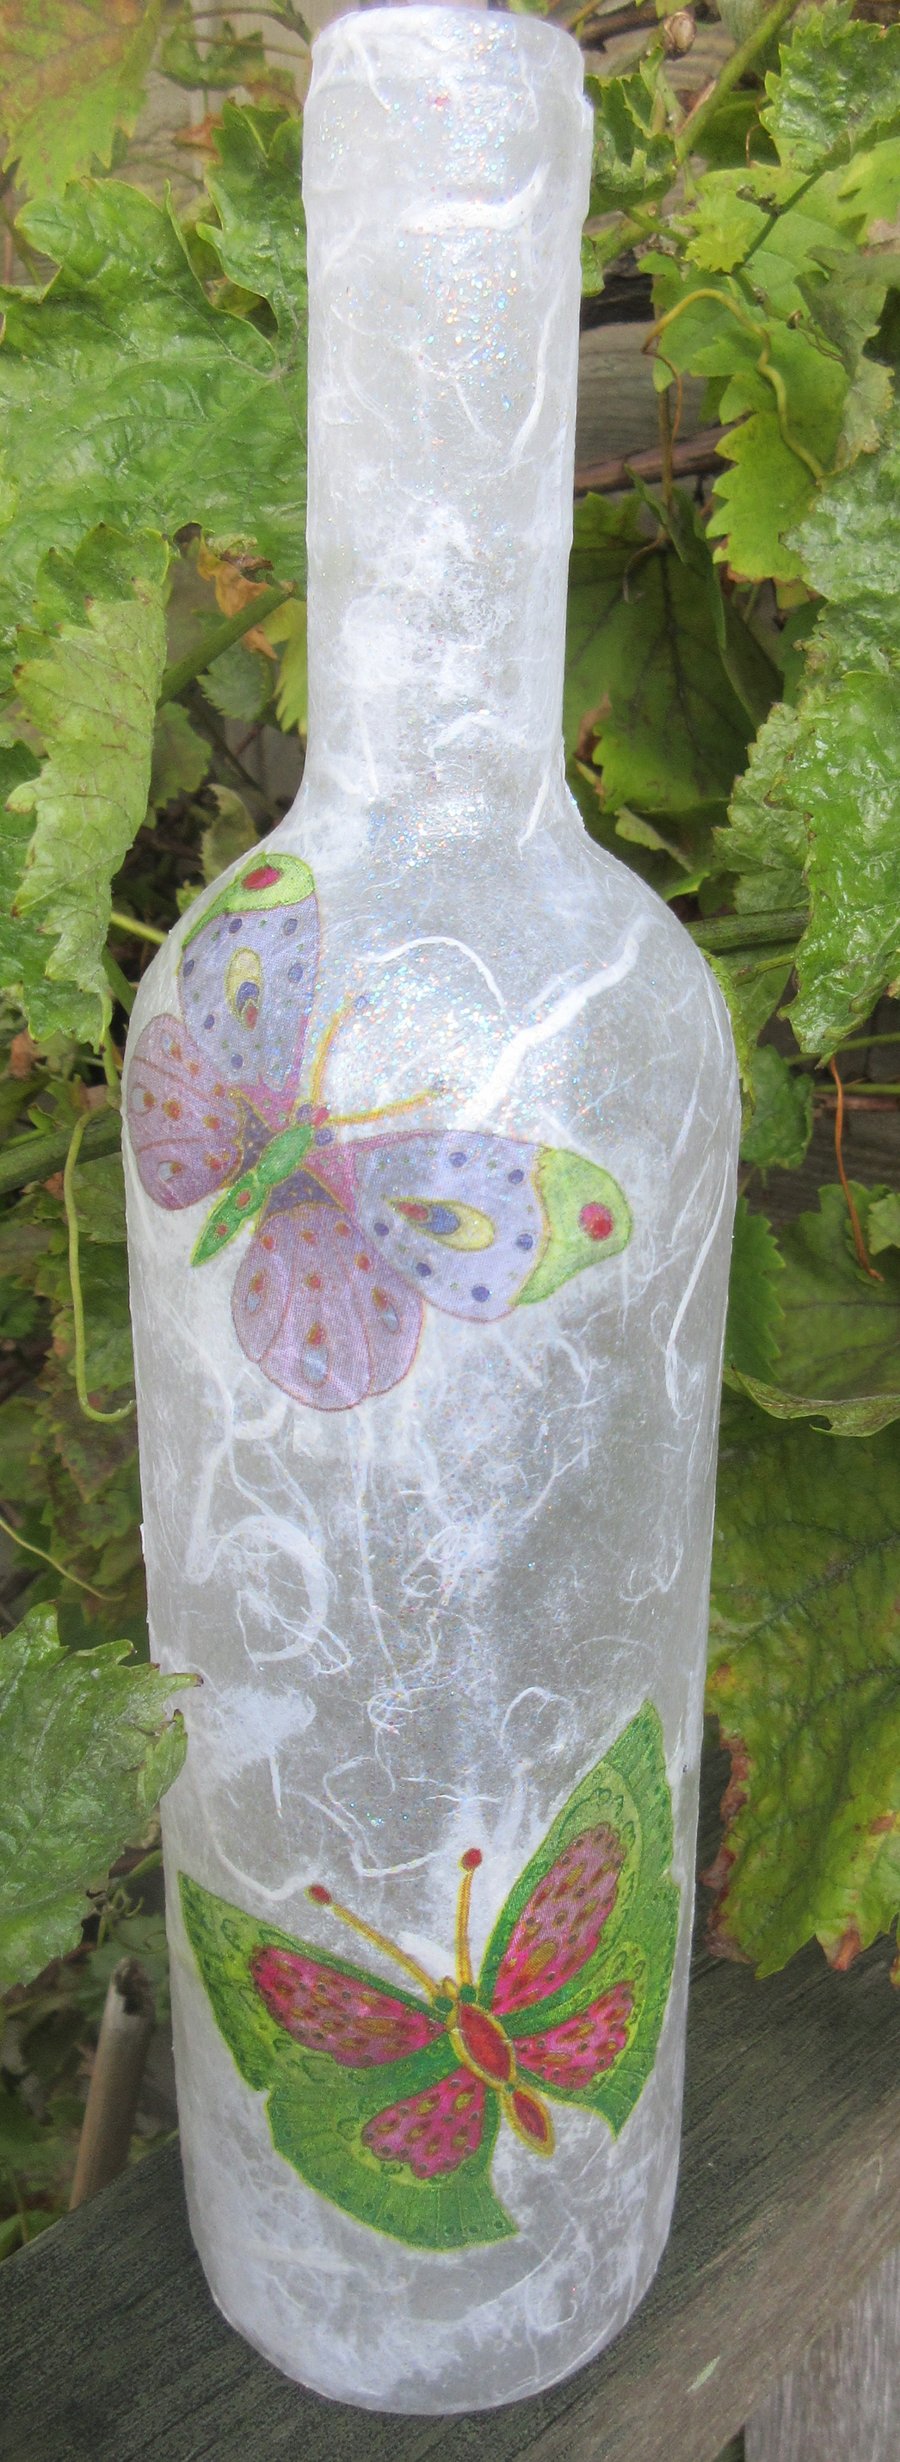 Bottle decoupaged in strawsilk and butterflies - available with lights